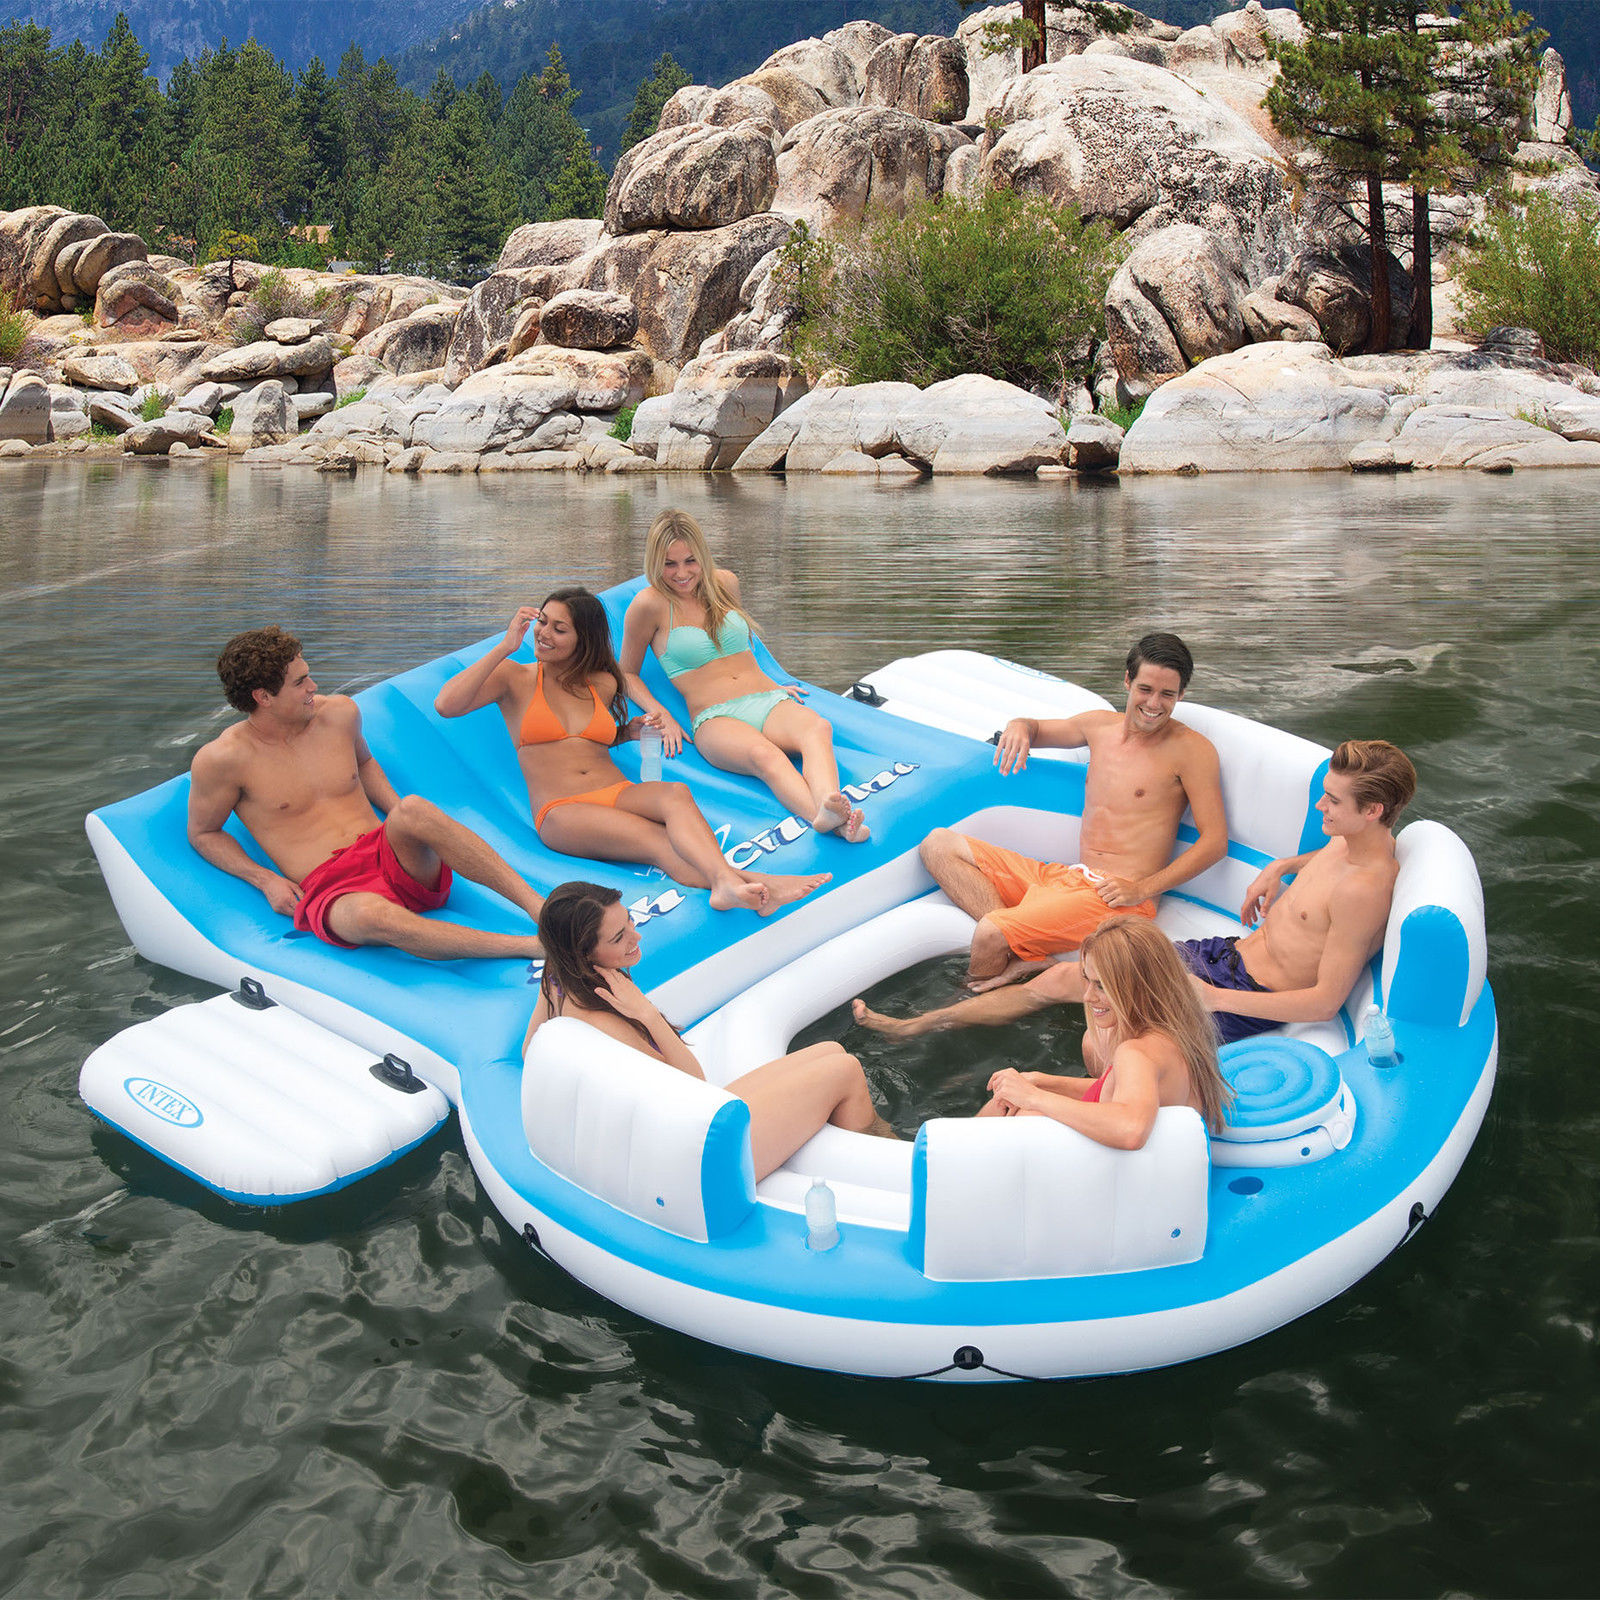 Intex-Inflatable-Relaxation-Island-Raft-With-Backrests-and-Cooler-56299CA  Intex-Inflatable-Relaxation-Island-Raft-With-Backrests-and-Cooler-56299CA  Intex-Inflatable-Relaxation-Island-Raft-With-Backrests-and-Cooler-56299CA  Intex-Inflatable-Relaxation-Island-Raft-With-Backrests-and-Cooler-56299CA  Intex-Inflatable-Relaxation-Island-Raft-With-Backrests-and-Cooler-56299CA Have one to sell? Sell now Intex Inflatable Relaxation Island Raft With Backrests and Cooler Only $112.99! (Reg $299.99)